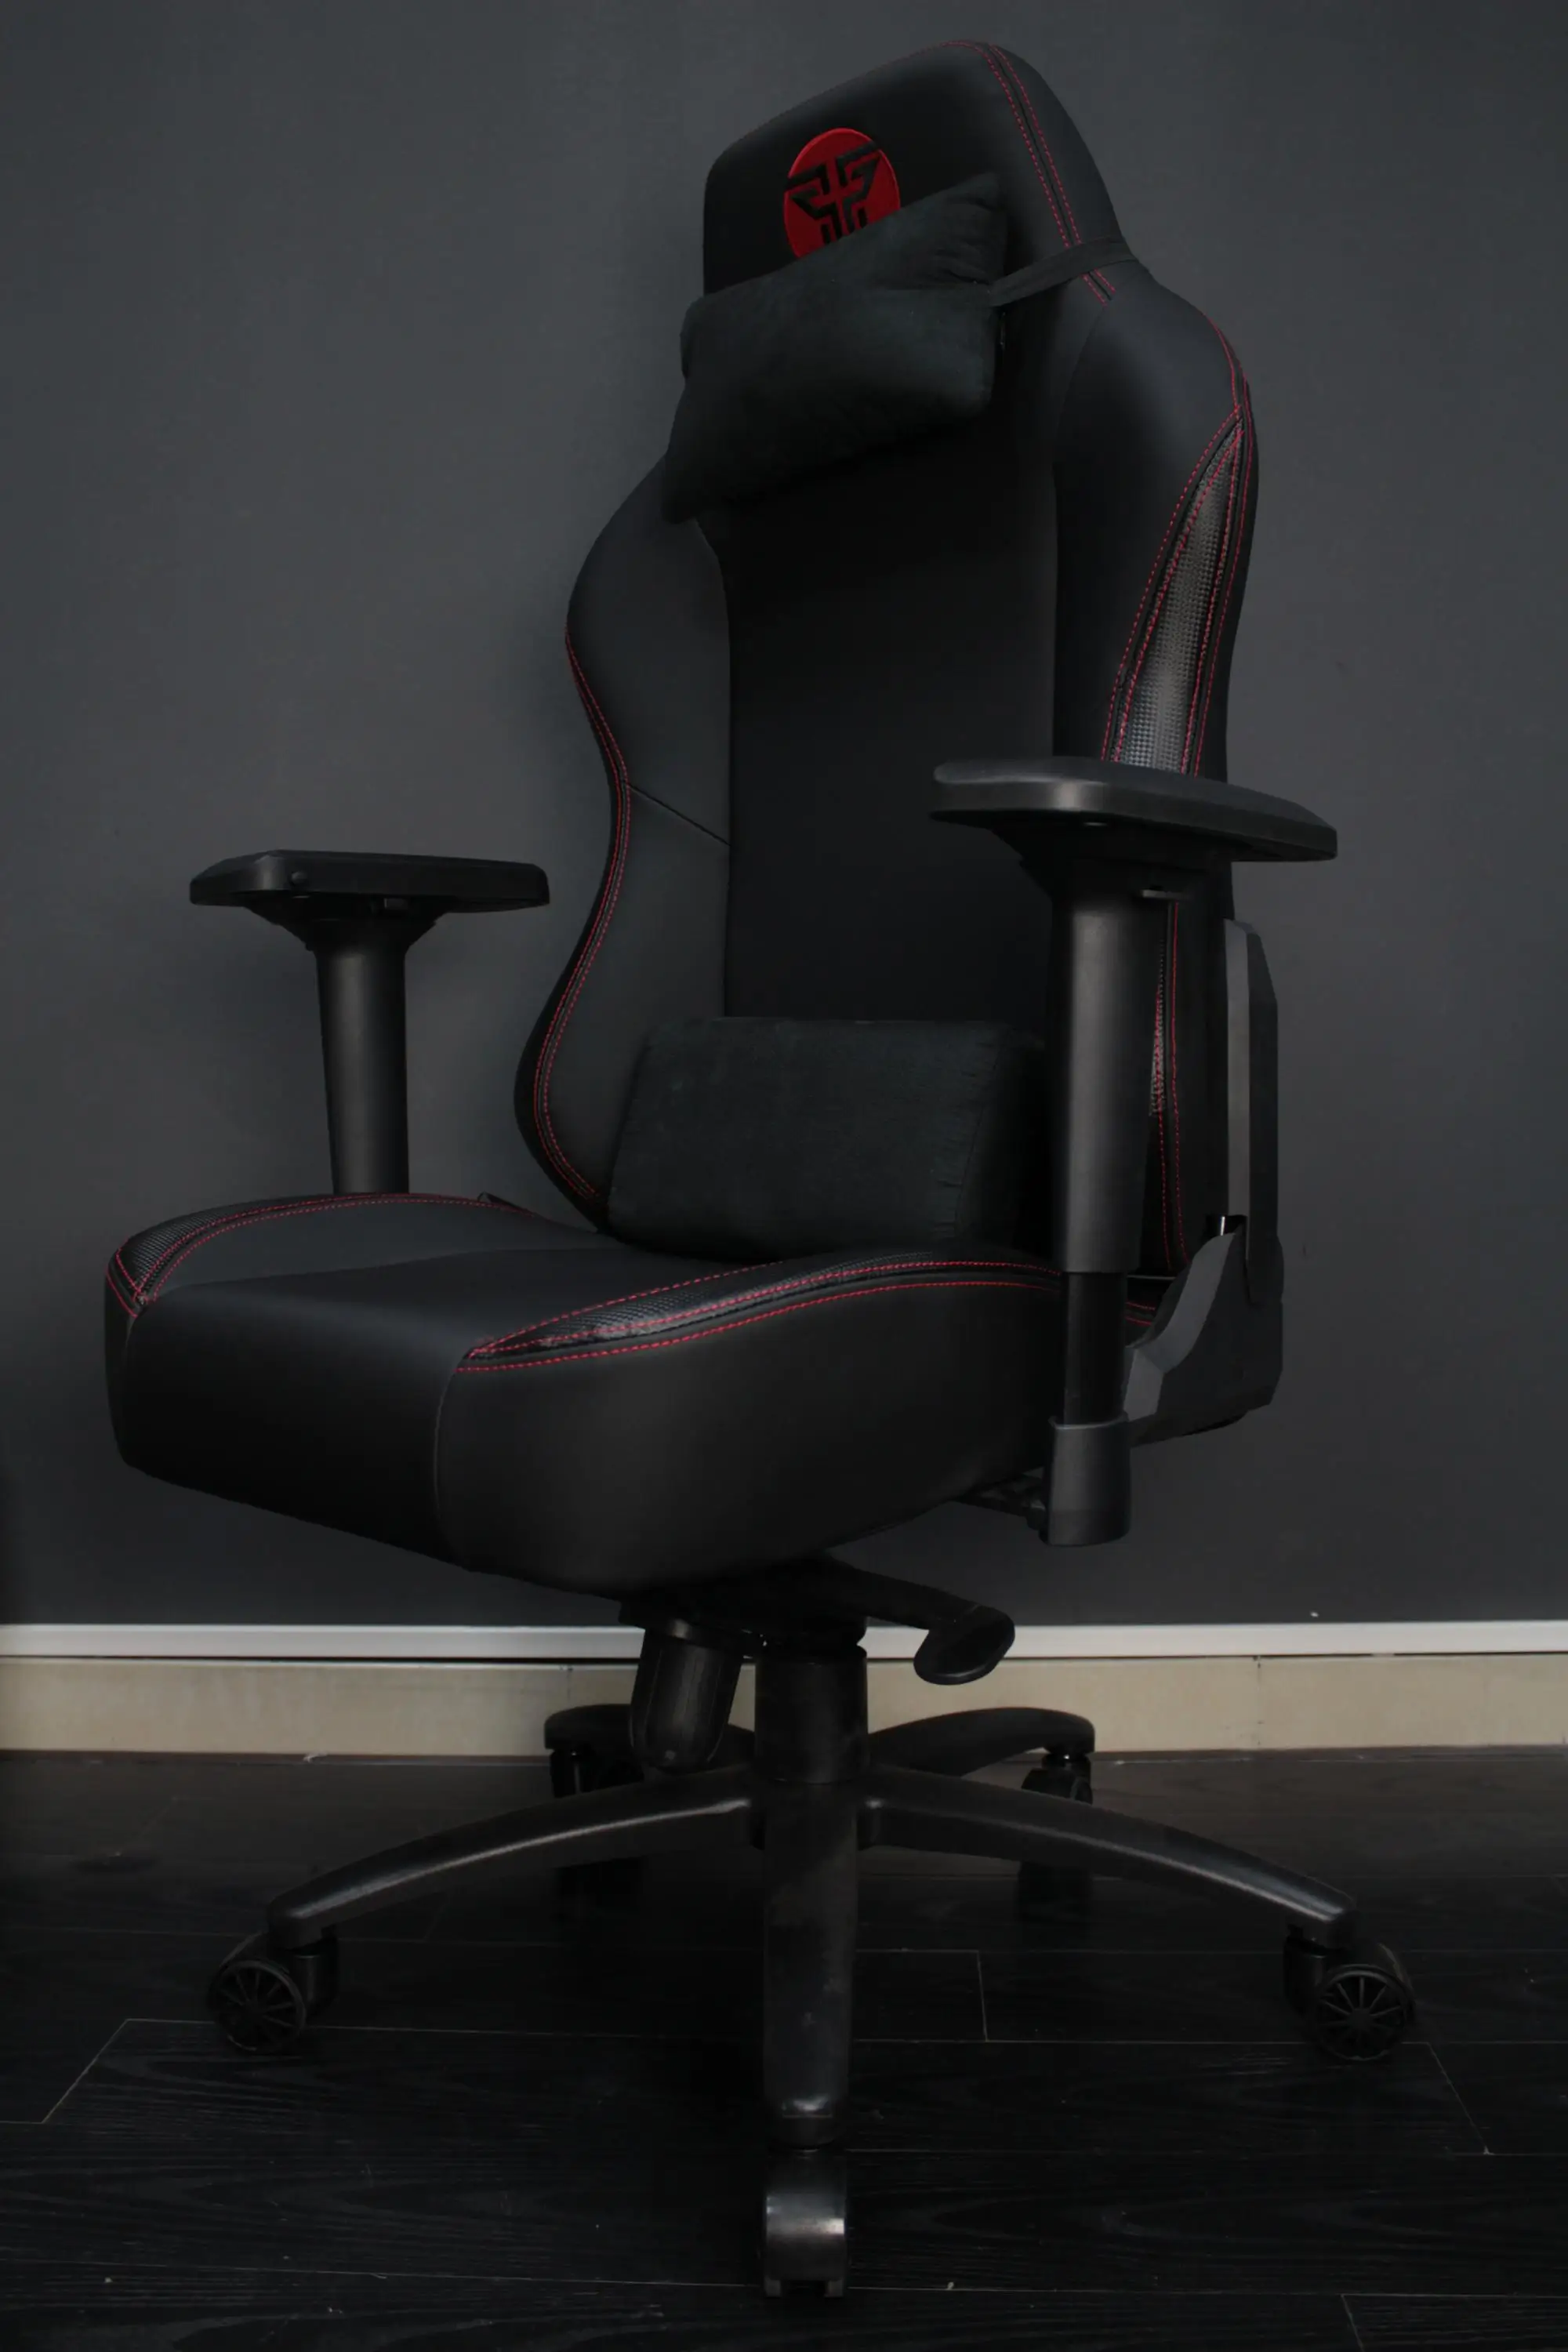 Fantech GC-183 Ergonomic Stability & Safety Gaming Chair6